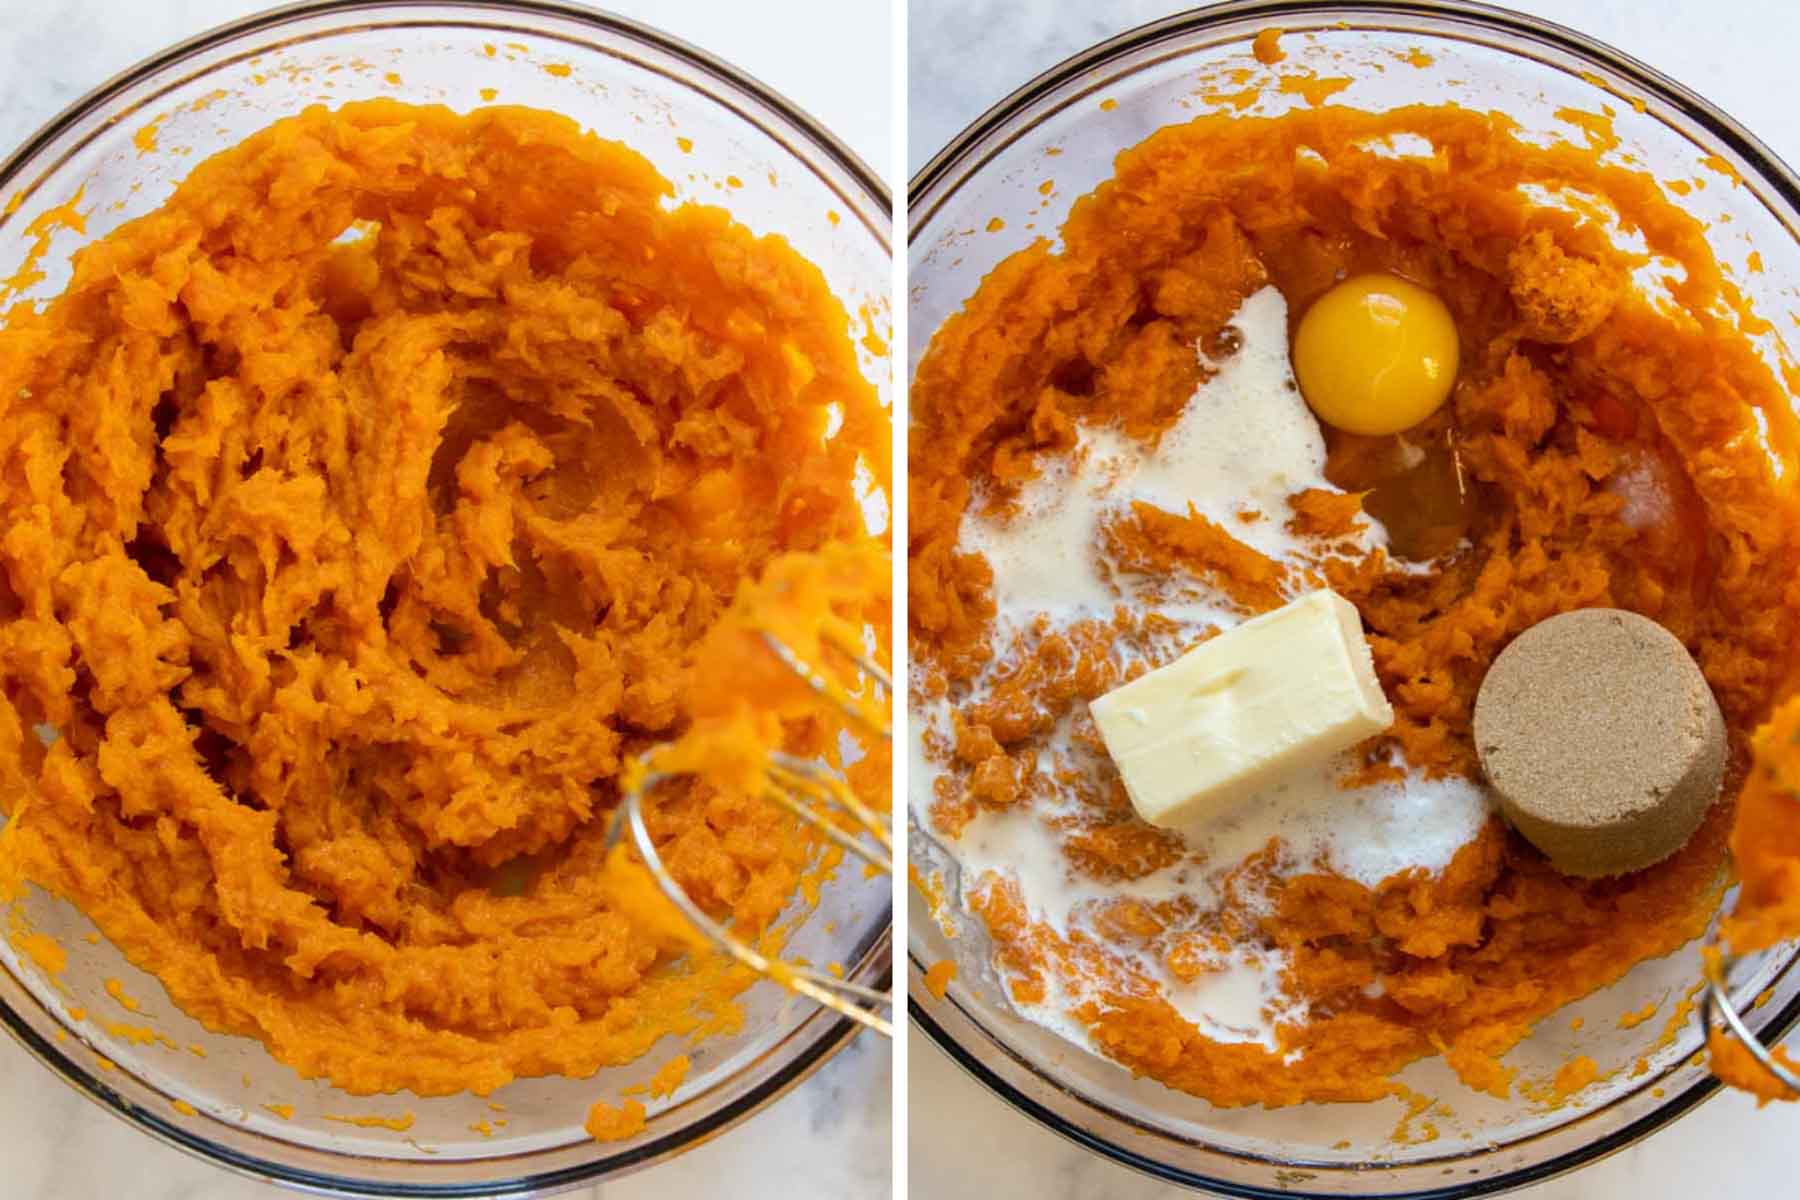 images showing how to make gluten free sweet potato casserole.